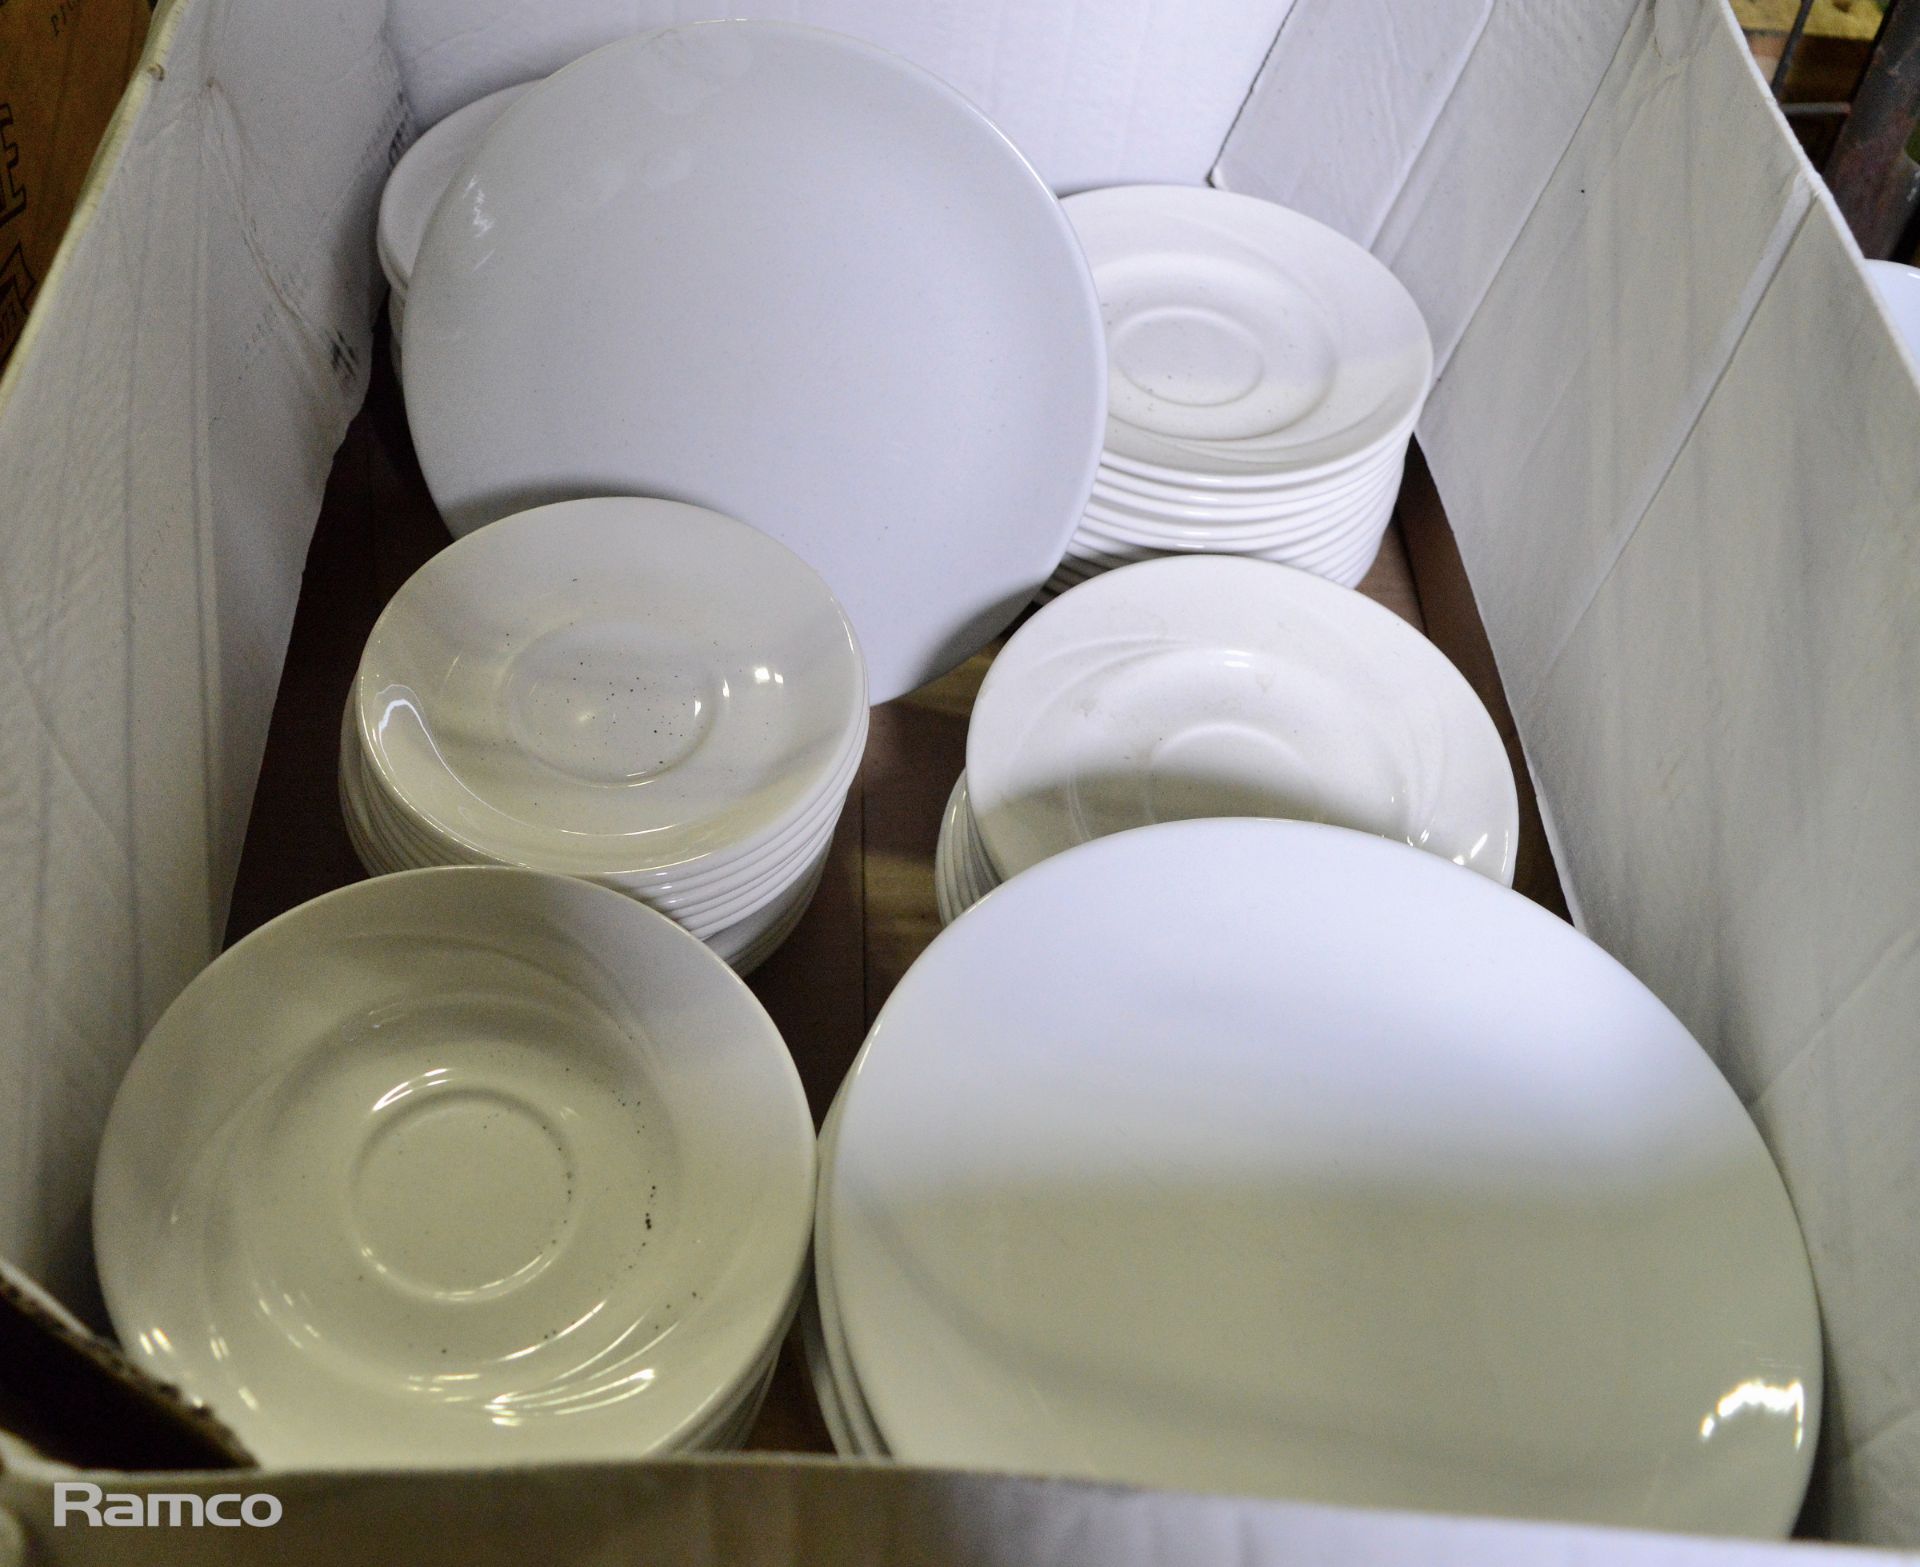 Crockery incl. plates, cups, saucers - Image 3 of 5